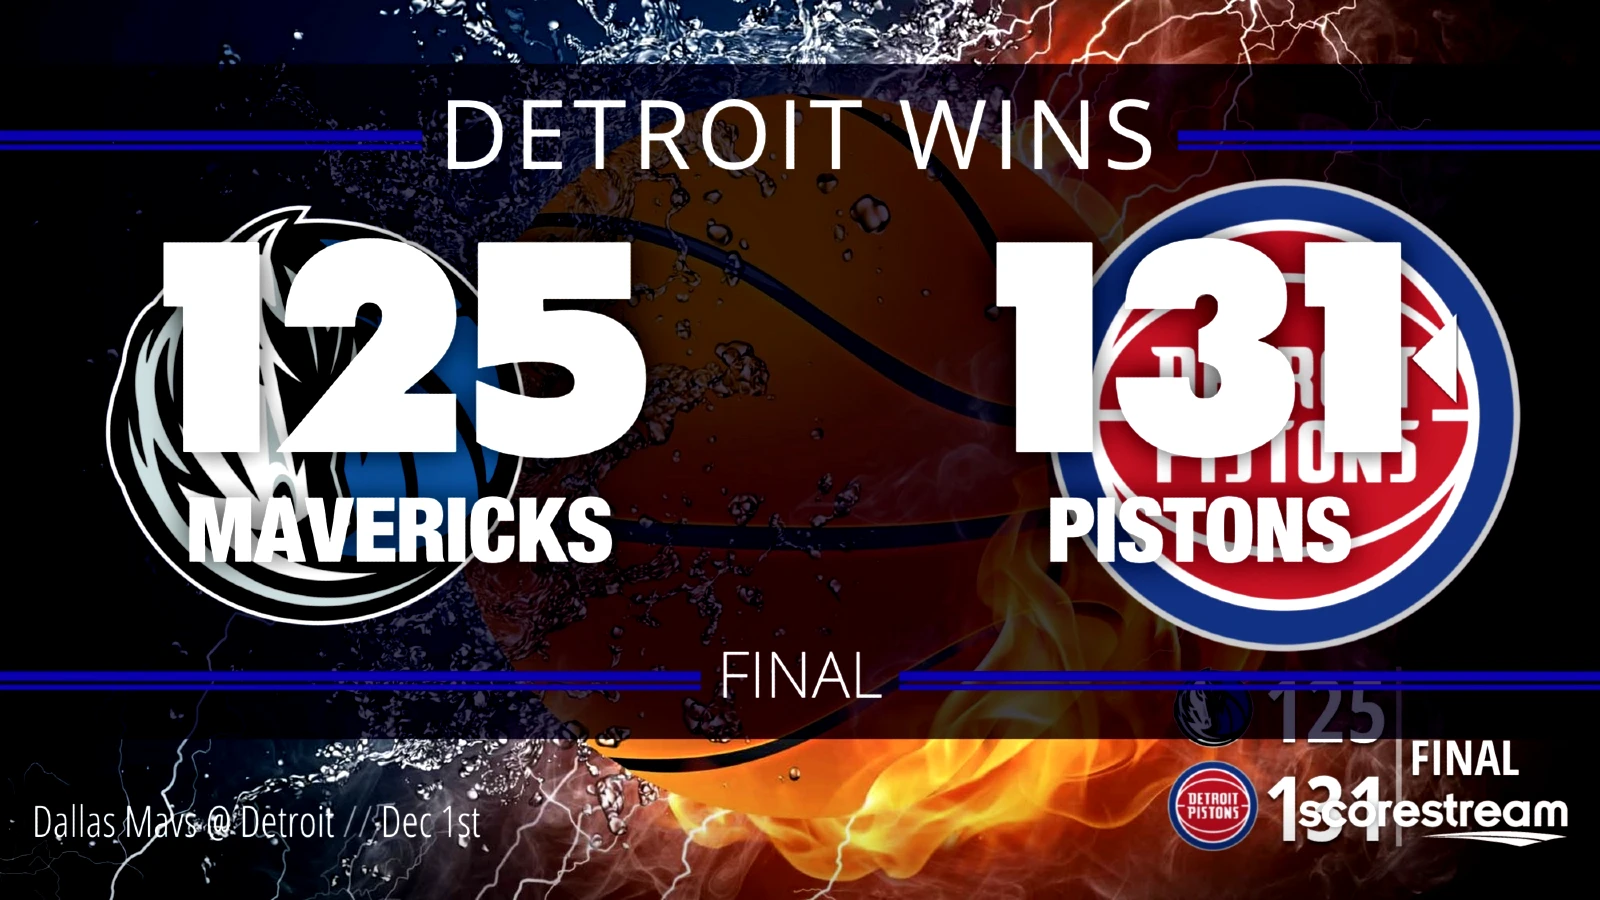 The NBA scores between the Detroit Pistons 131 and Dallas Mavericks 125 in OT